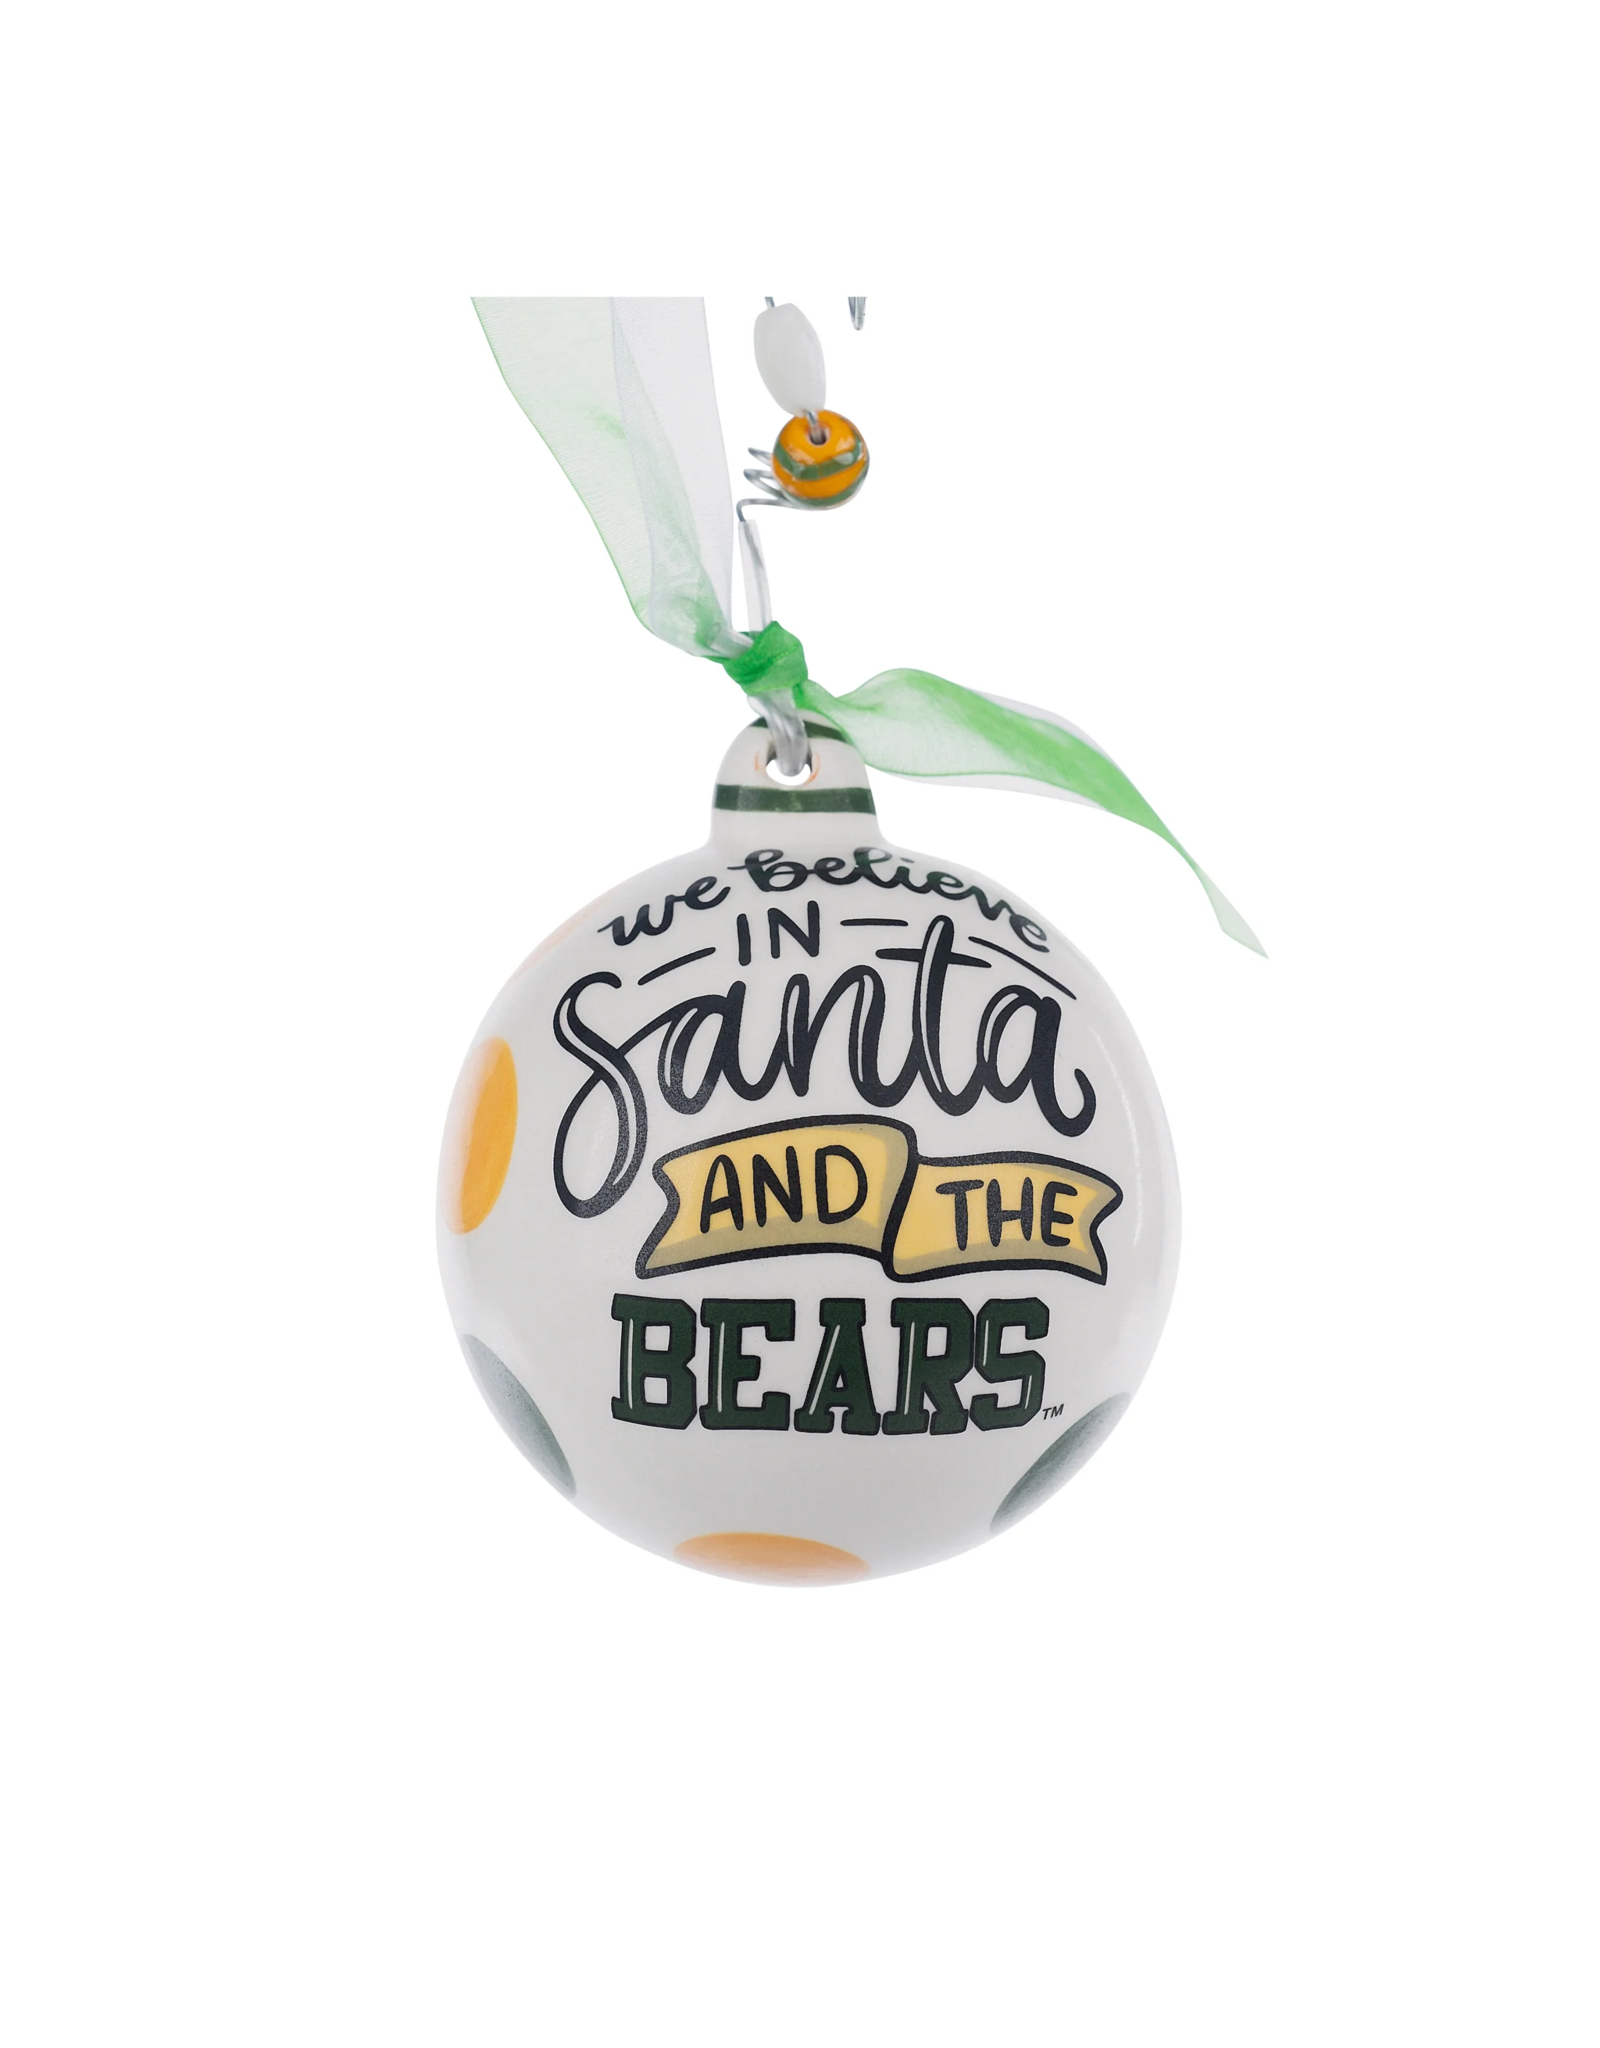 Glory Haus Baylor We Believe Ball Ornament